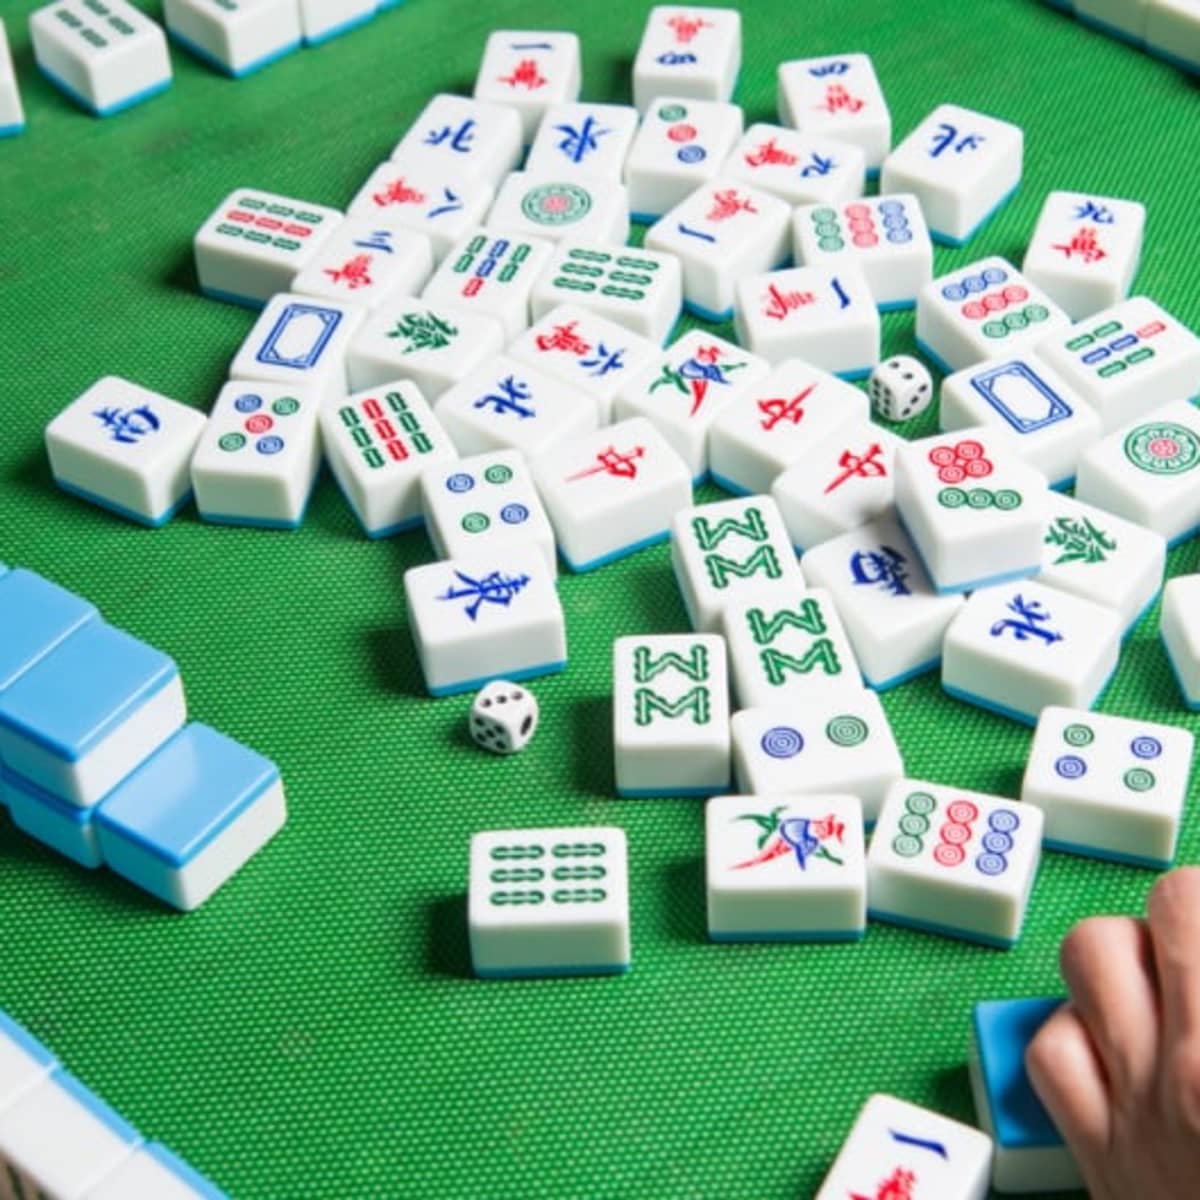 The Simple Rules of Chinese Mahjong - HubPages